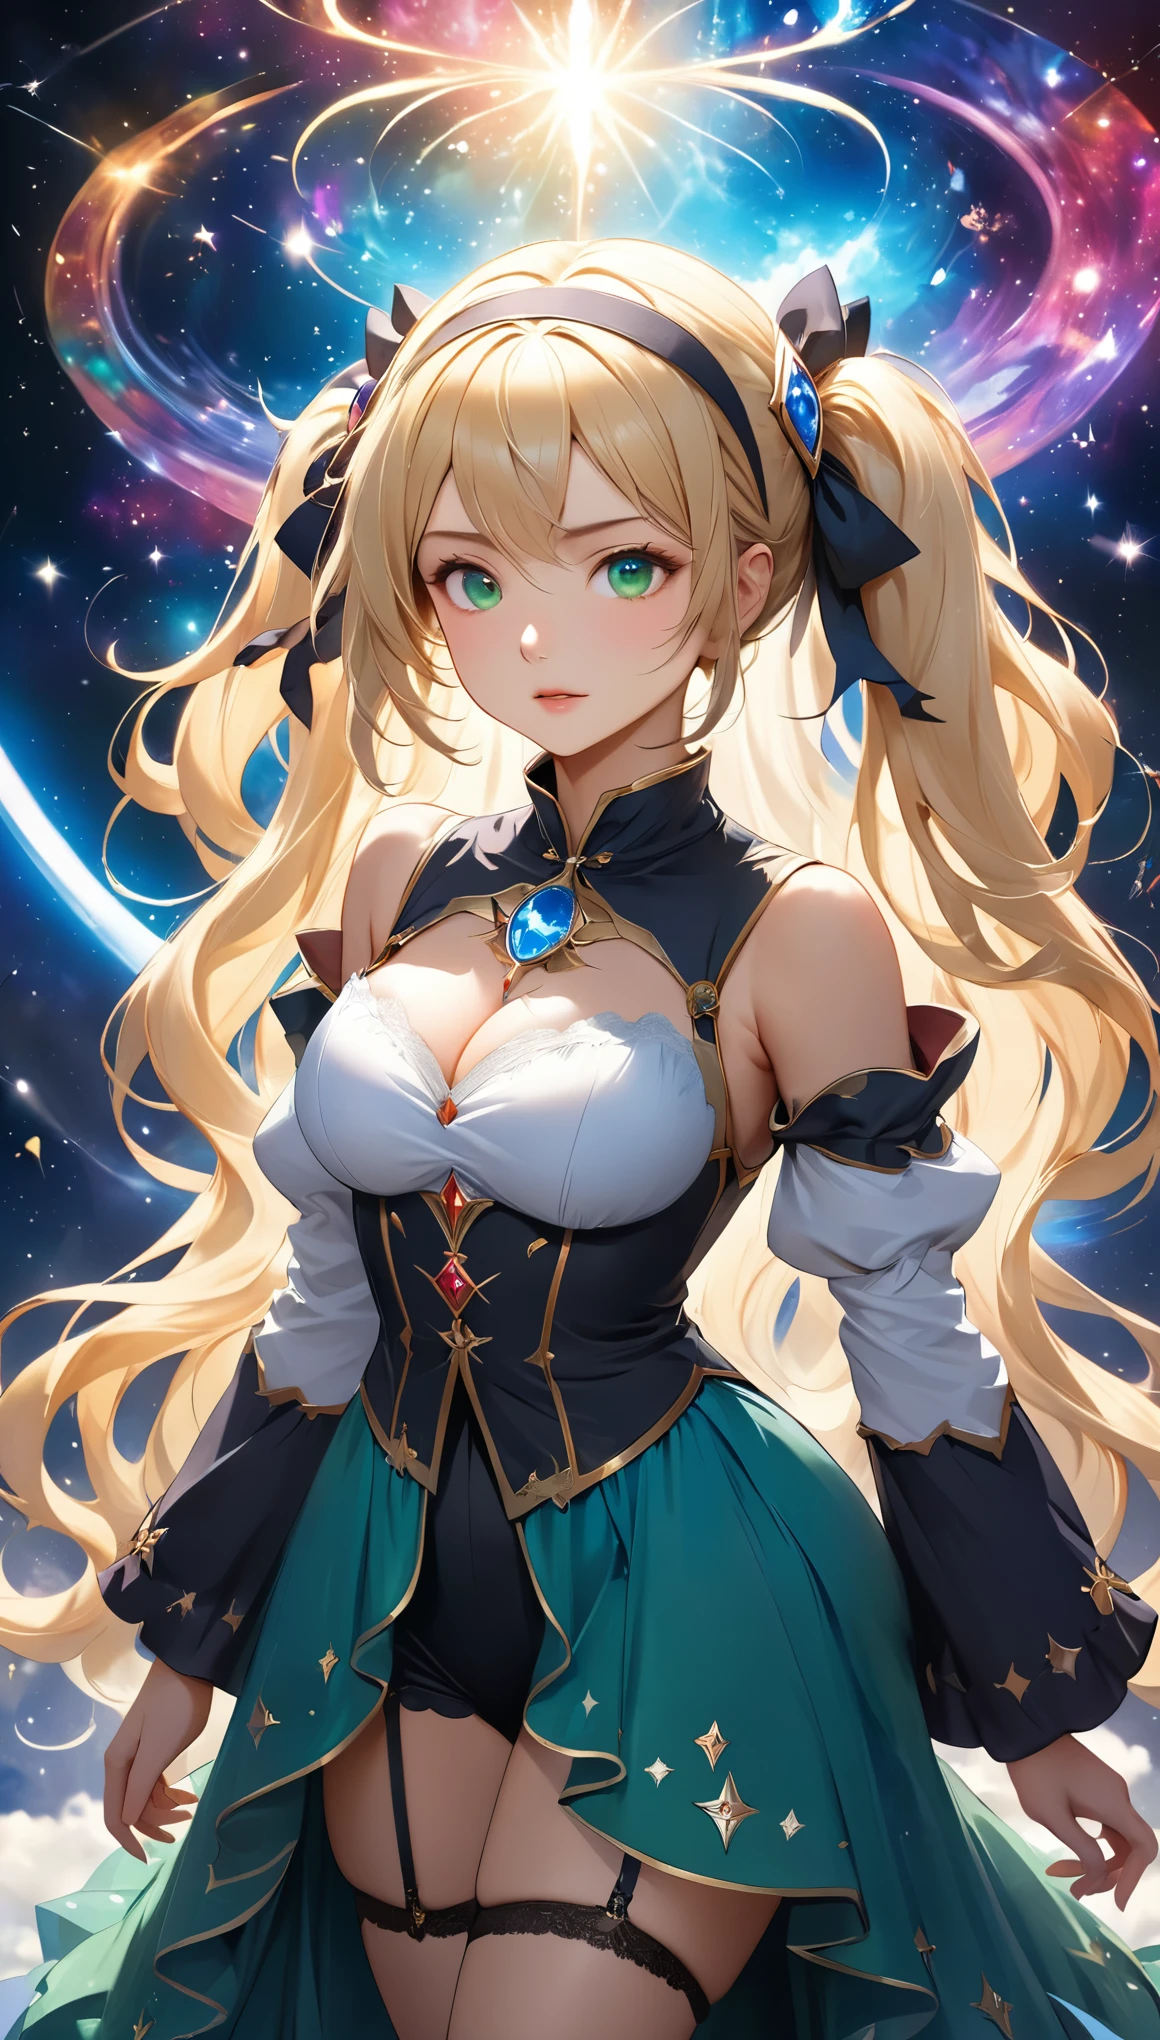 space war, 8K resolution, masterpiece, Highest quality, Award-winning works, unrealistic, Only sexy women, healthy shaped body, Age 25, White wavy long hair, hair band, huge firm bouncing busts, witch, royal coat of arms, elegant, Very detailed, Digital Painting, artステーション, コンセプトart, Smooth, Sharp focus, shape, artジャム、Greg Rutkowski、Alphonse Mucha、William Adolphe Bouguereau、art：Stephanie Law , Magnificent cosmic background, Royal Jewel, nature, Full Shot, Symmetric, Greg Rutkowski, Charlie Bowwater, beep, Unreal 5, Surreal, Dynamic Lighting, ファンタジーart, Complex colors, カラフルなmagic陣, magic, Small face, Very delicate facial expressions, Delicate eye depiction, Upper body close-up,, erotic, dynamic sexy poses, One sexy woman, Healthy body shape, 24-year-old woman, doaxvv_marie rose, witch, Height: 170cm, big firm bouncing busts, , blonde very long wavy hair, twin tail,, Glaring at the camera, Looking up, Invincible laughter, A complex, gothic-style long dress, , Green long skirt, garter belt, Brown Loafers, Standing Alone